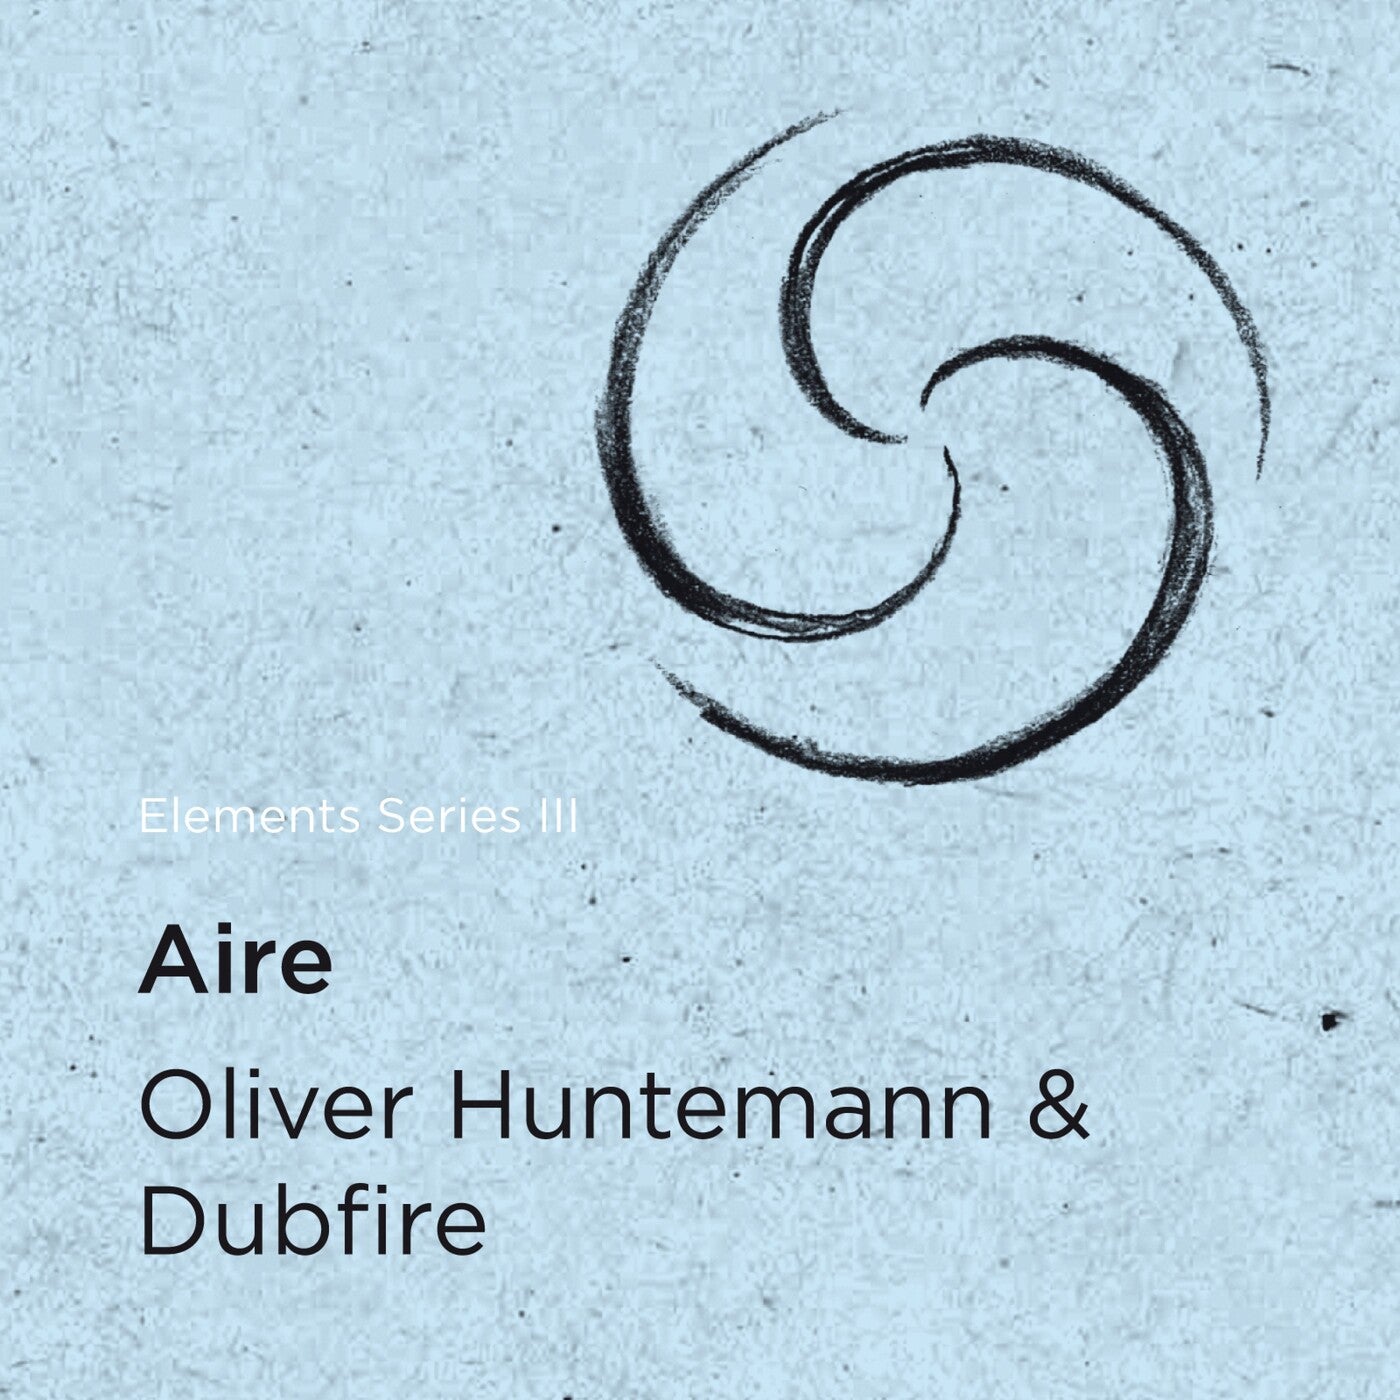 Elements Series III: Aire